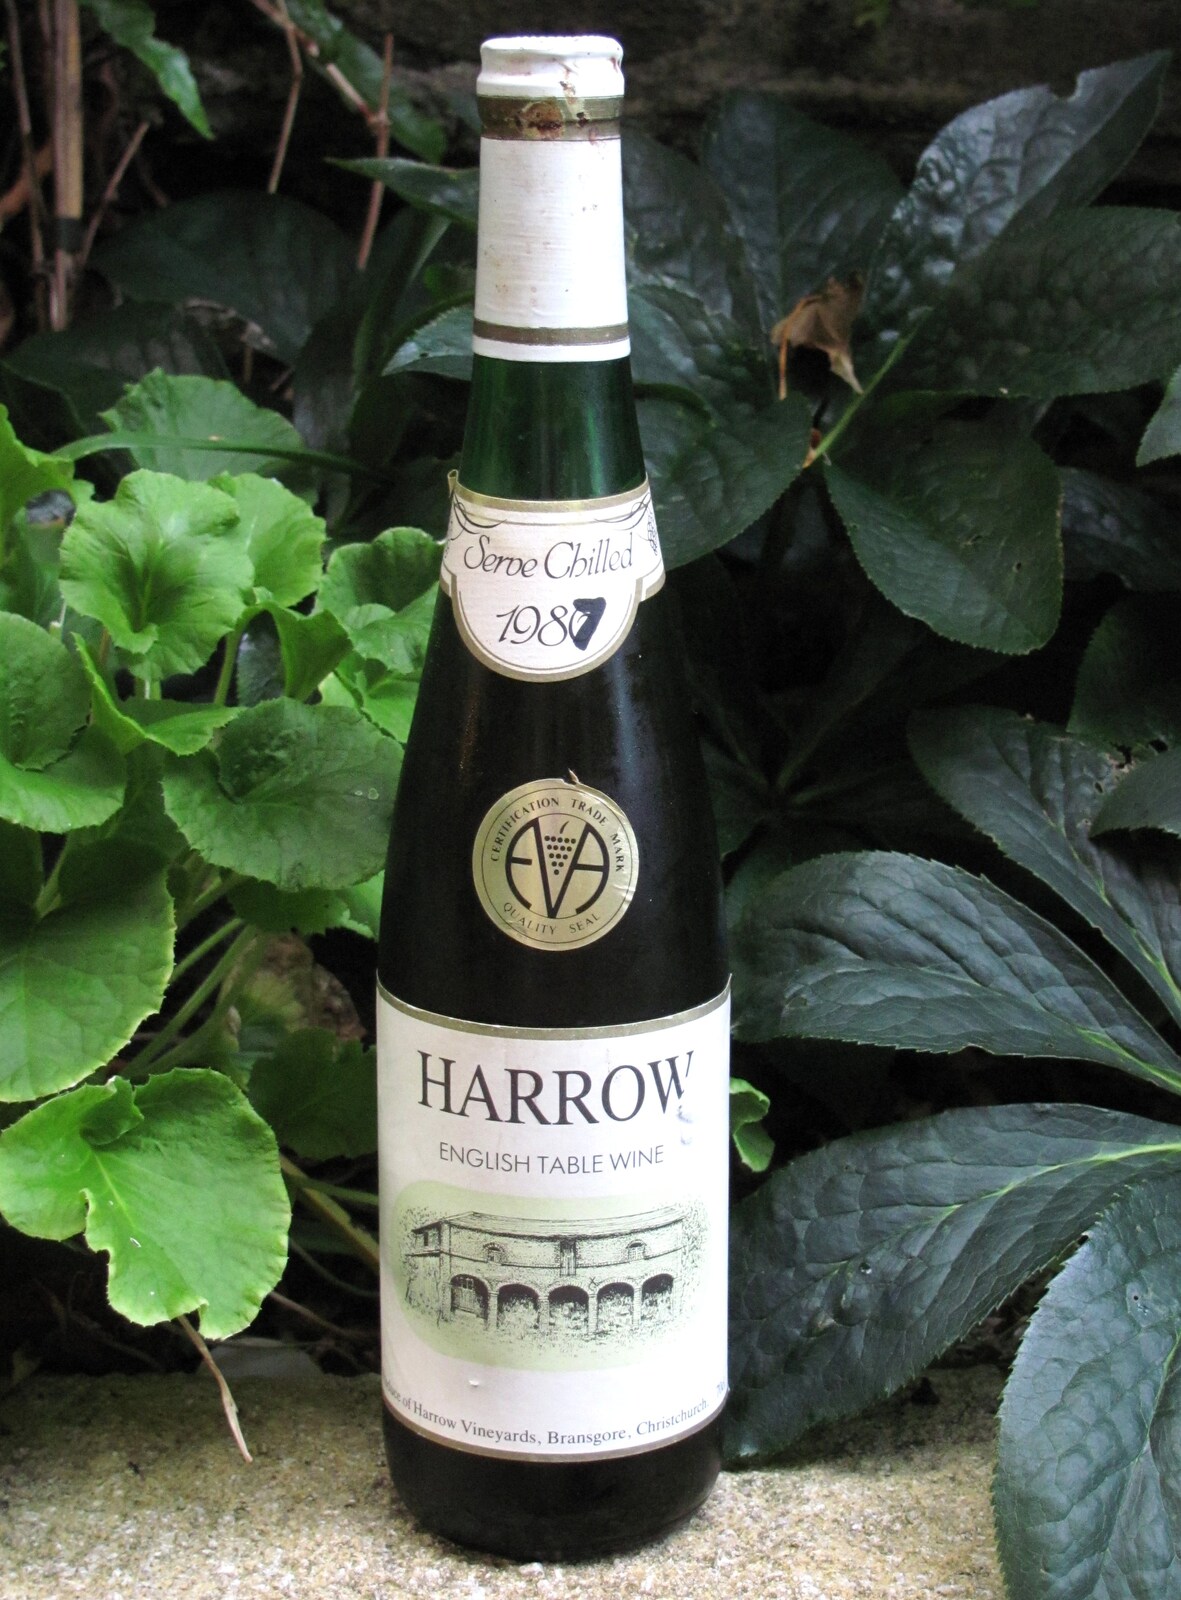 The legendary 1987 bottle of Harrow wine from Mike's Memorial, Prince Hall Hotel, Two Bridges, Dartmoor - 12th July 2011